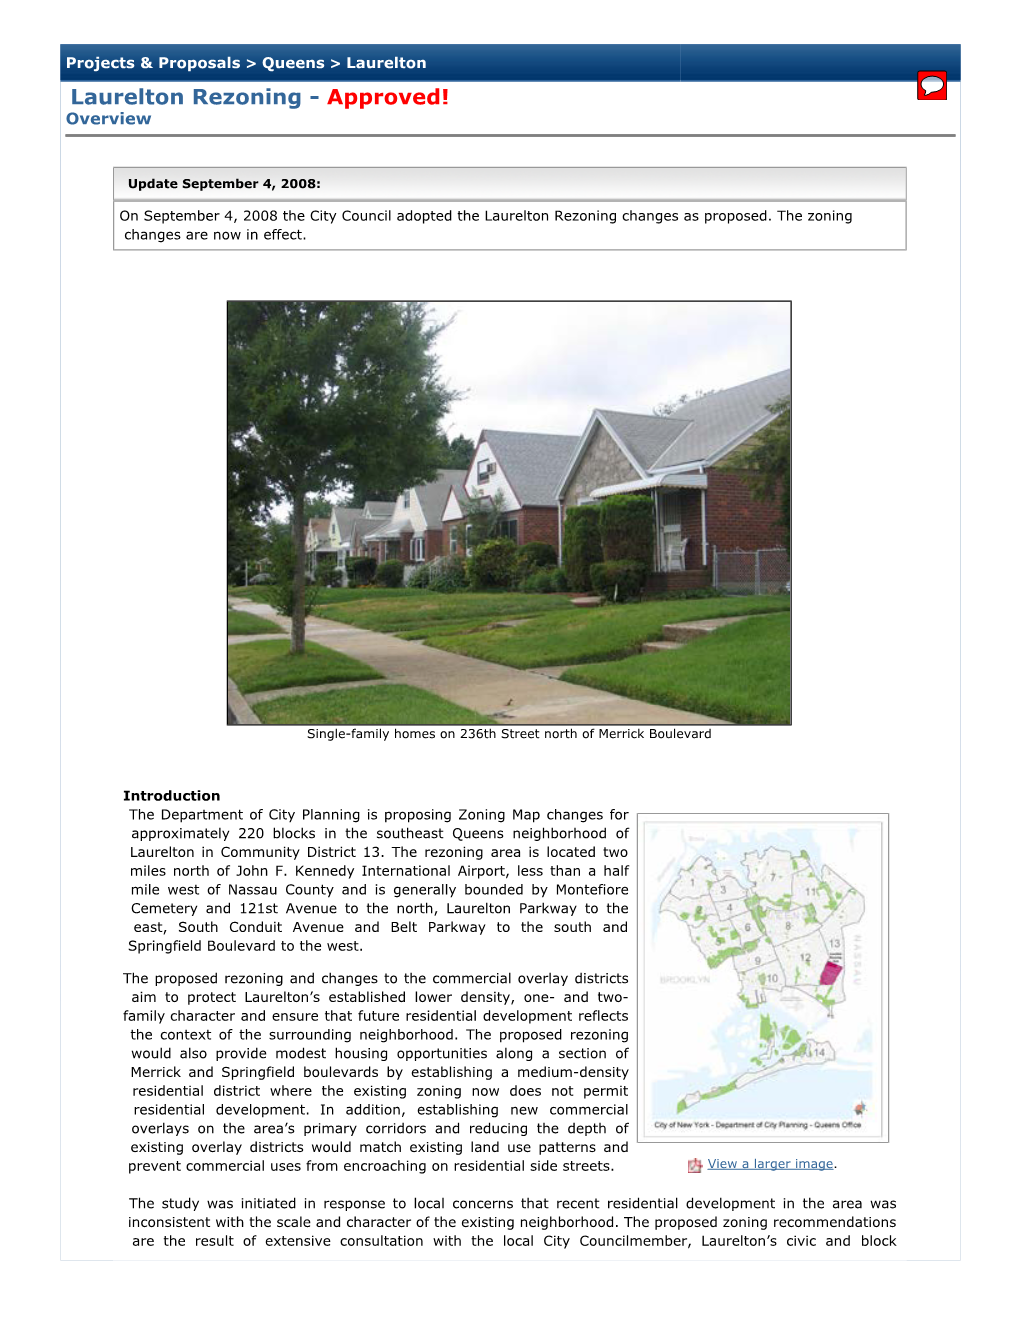 Laurelton Rezoning - Approved! Overview